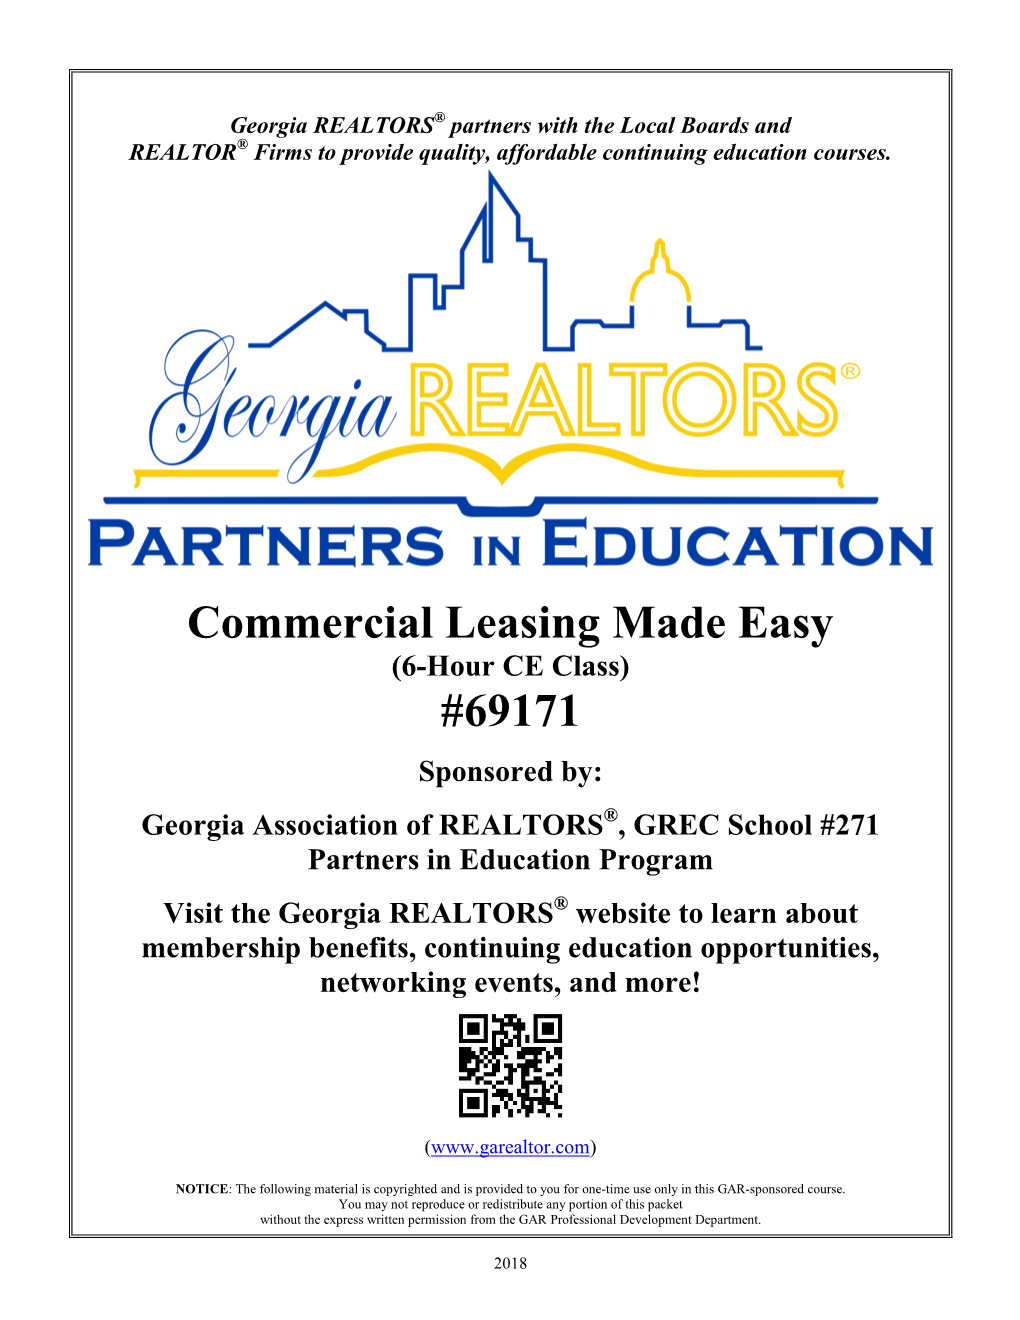 Commercial Leasing Made Easy #69171